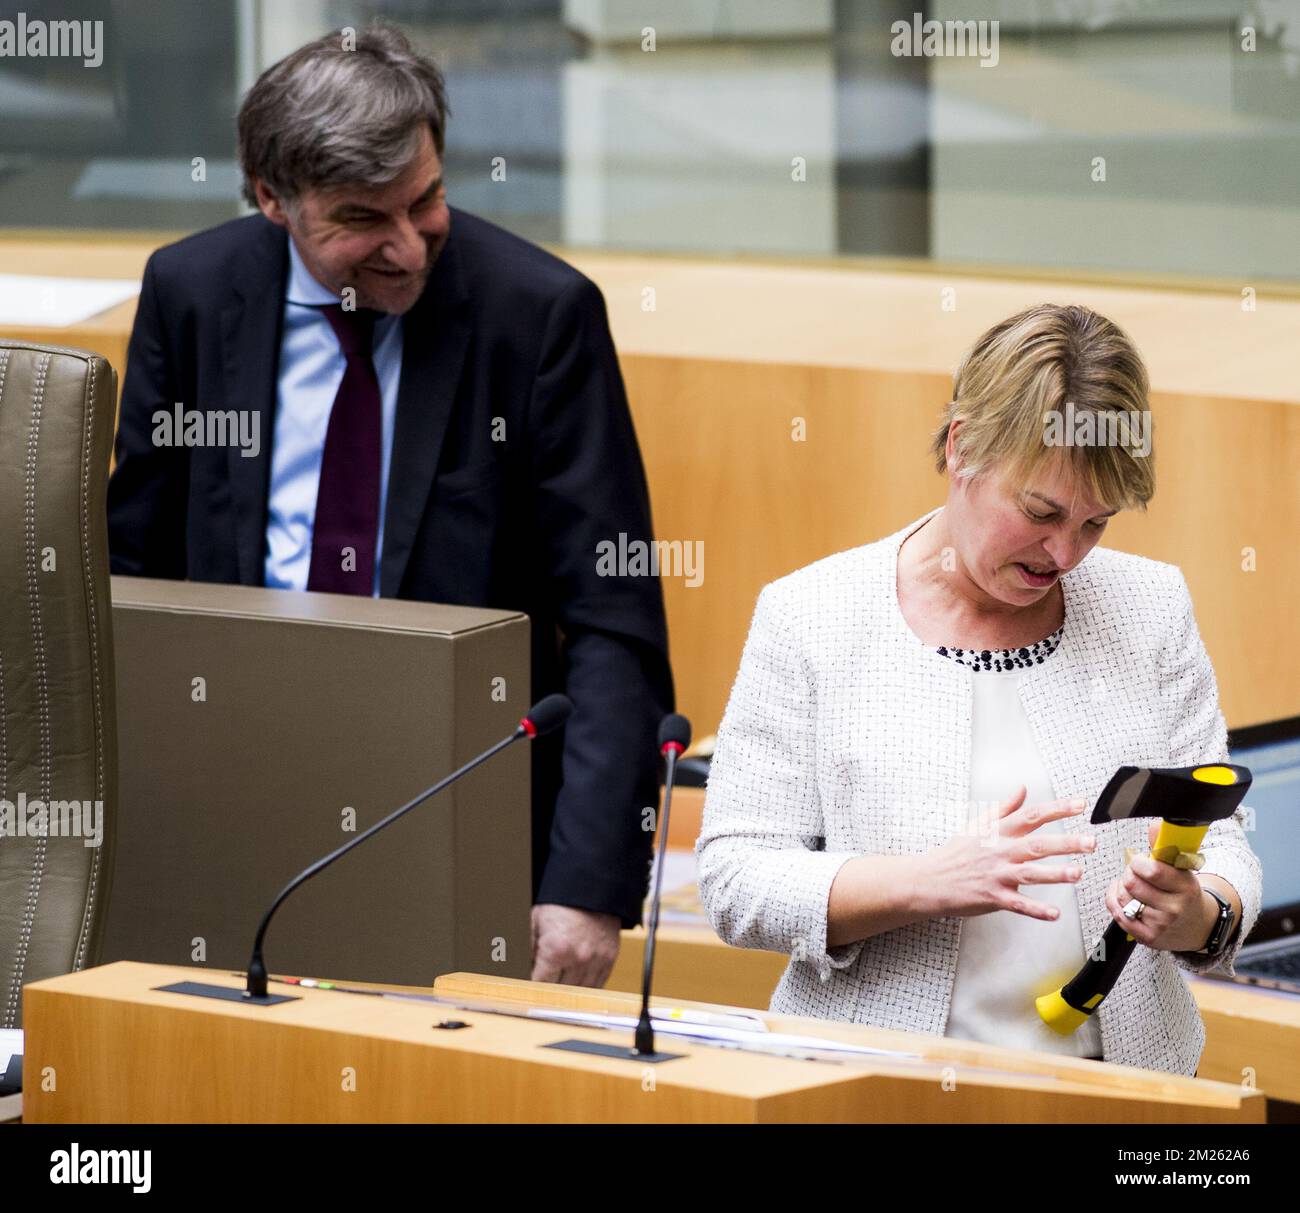 NV-A's Wilfried Vandaele and Flemish Minister of Environment, Spatial Planning and Agriculture Joke Schauvliege pictured after receiving an axe during a plenary session of the Flemish Parliament in Brussels, Wednesday 22 March 2017. BELGA PHOTO JASPER JACOBS Stock Photo